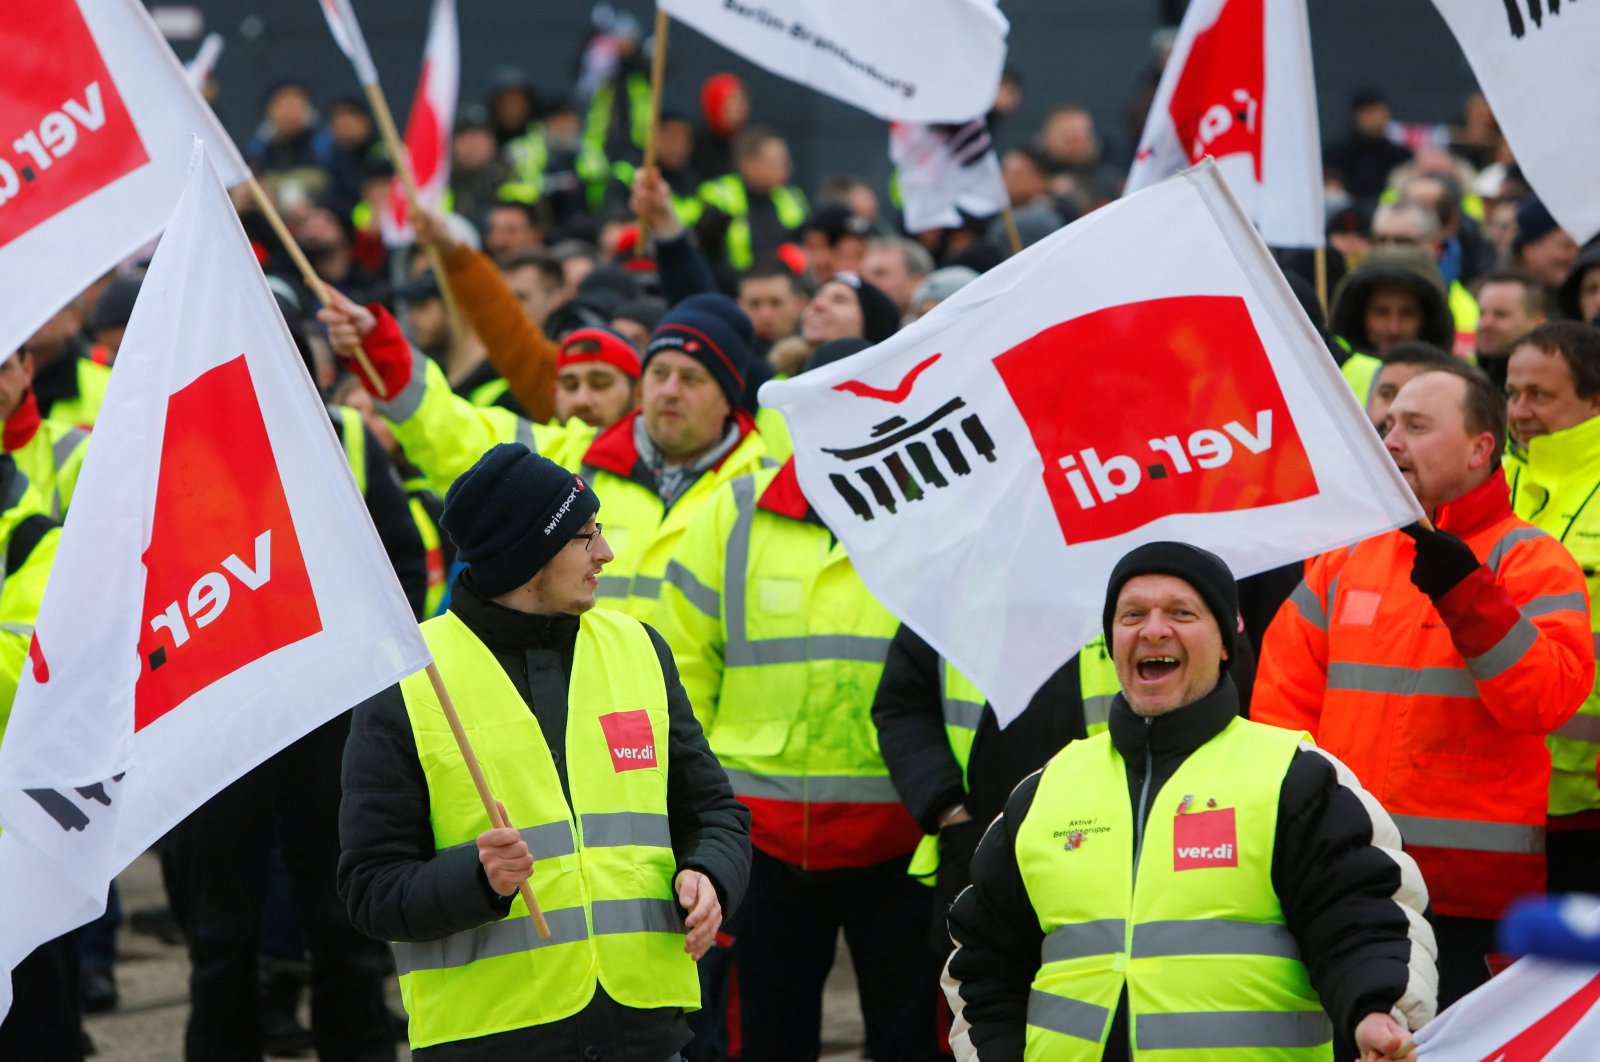 Demonstrators protest during a general strike by employees over pay demands, at the Berlin Brandenburg Airport (BER), in Schoenefeld near Berlin, Germany, Jan. 25, 2023. (Reuters Photo)